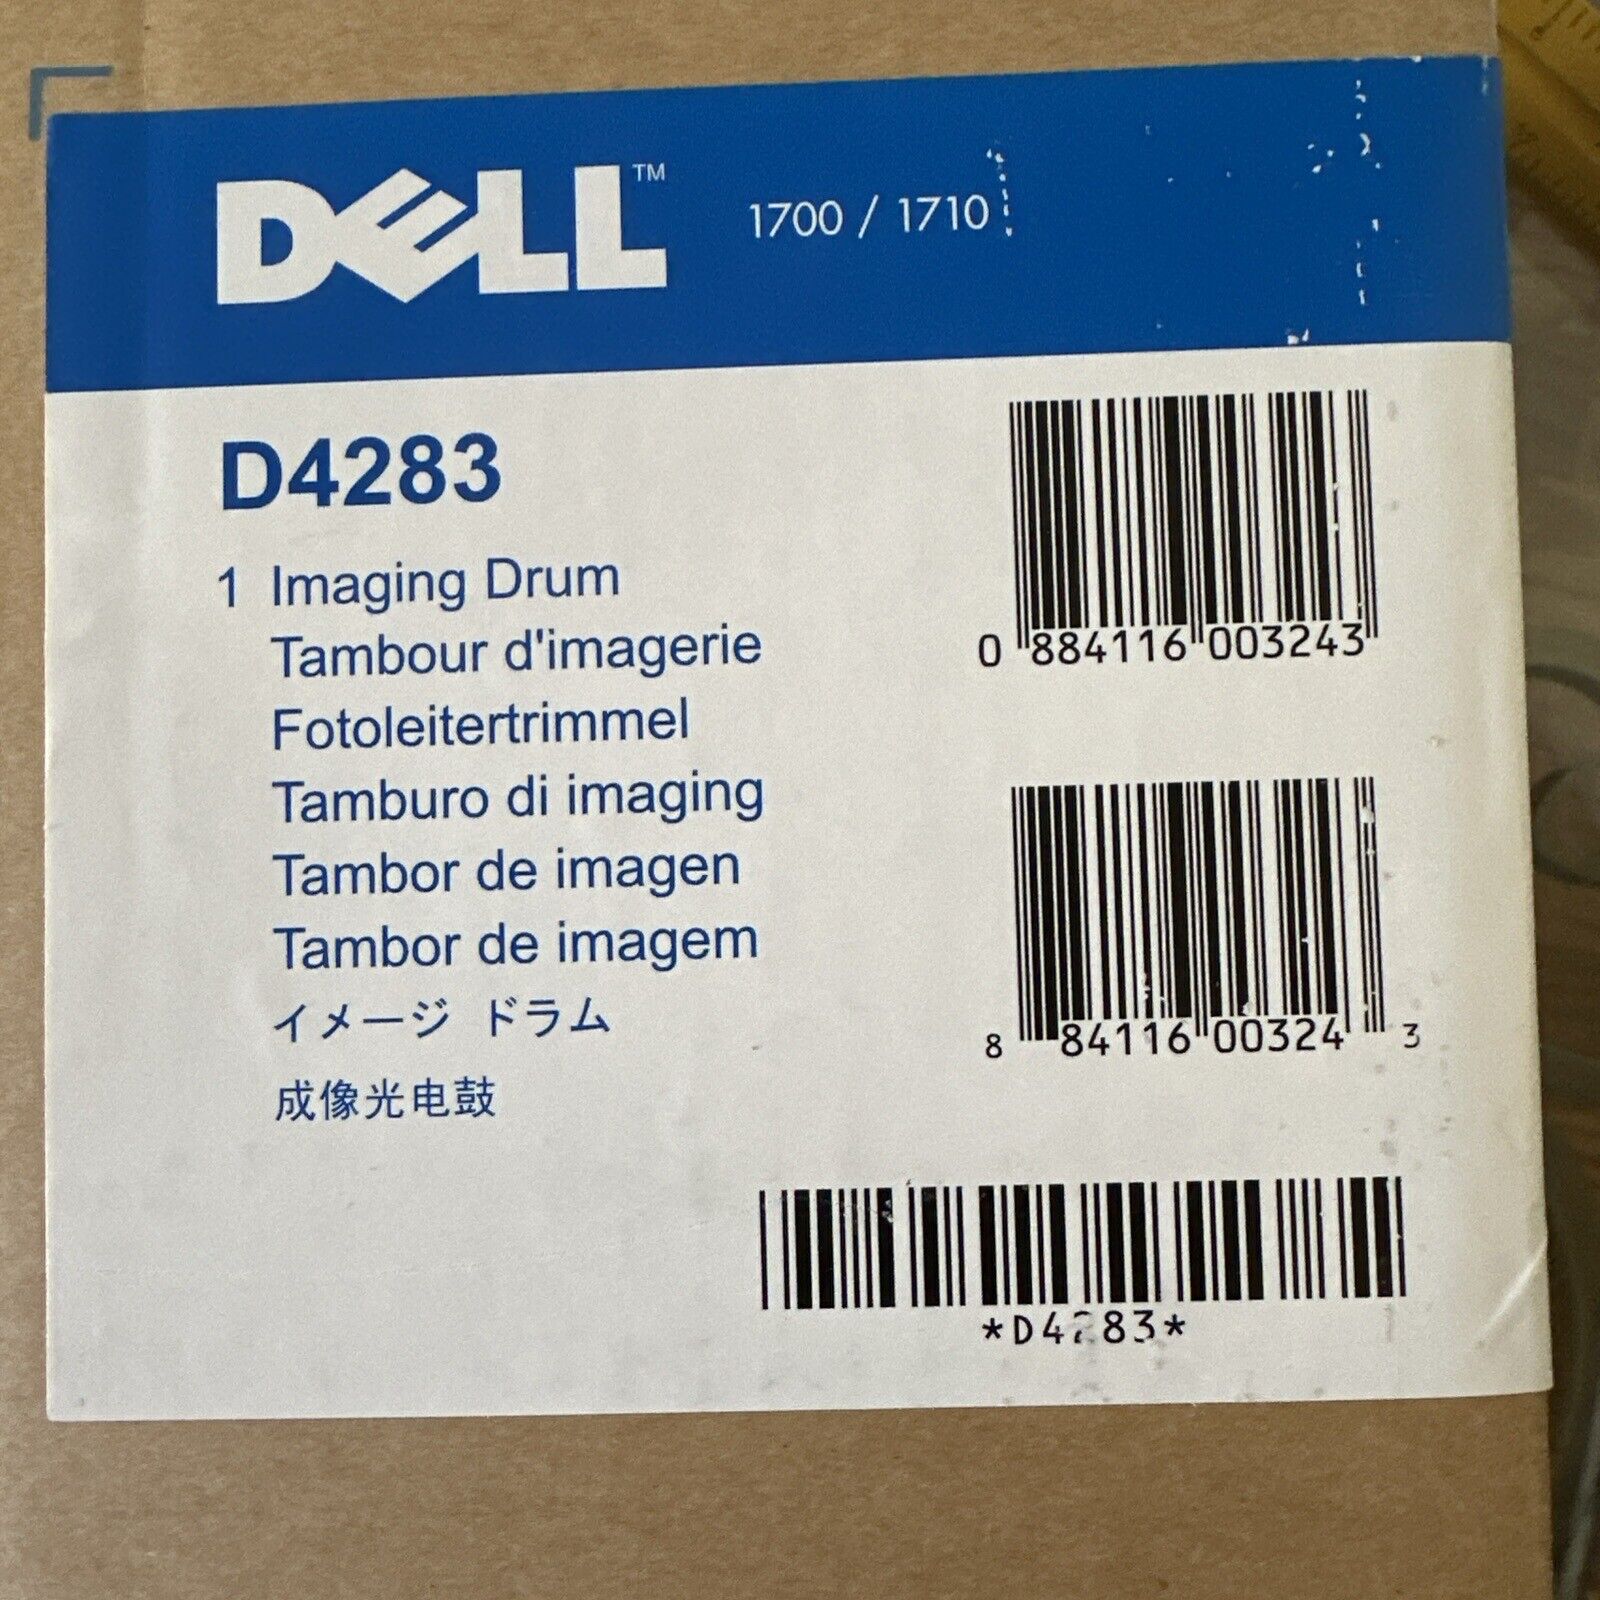 DELL GENUINE D4283 IMAGING DRUM, CARTRIDGE FOR 1700/1710. New Never Opened